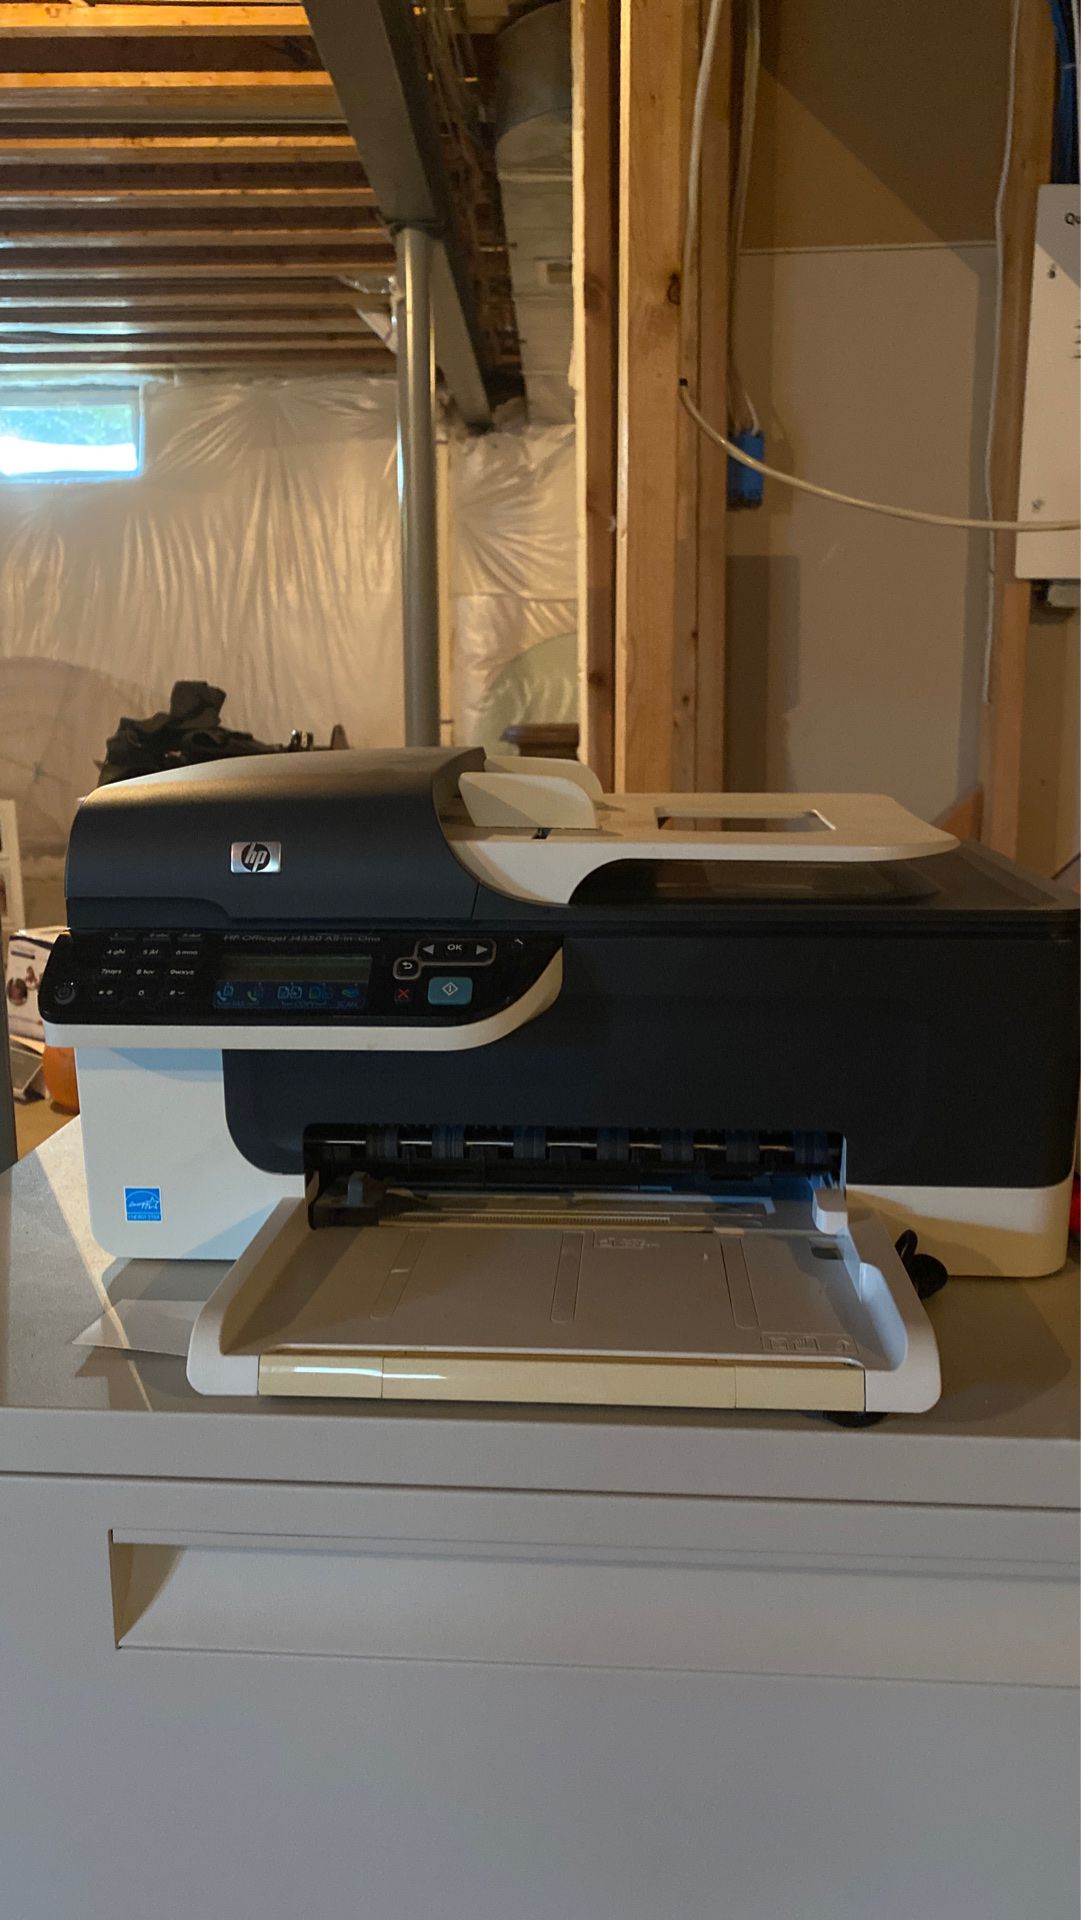 HP Officejet All-in-One Printer